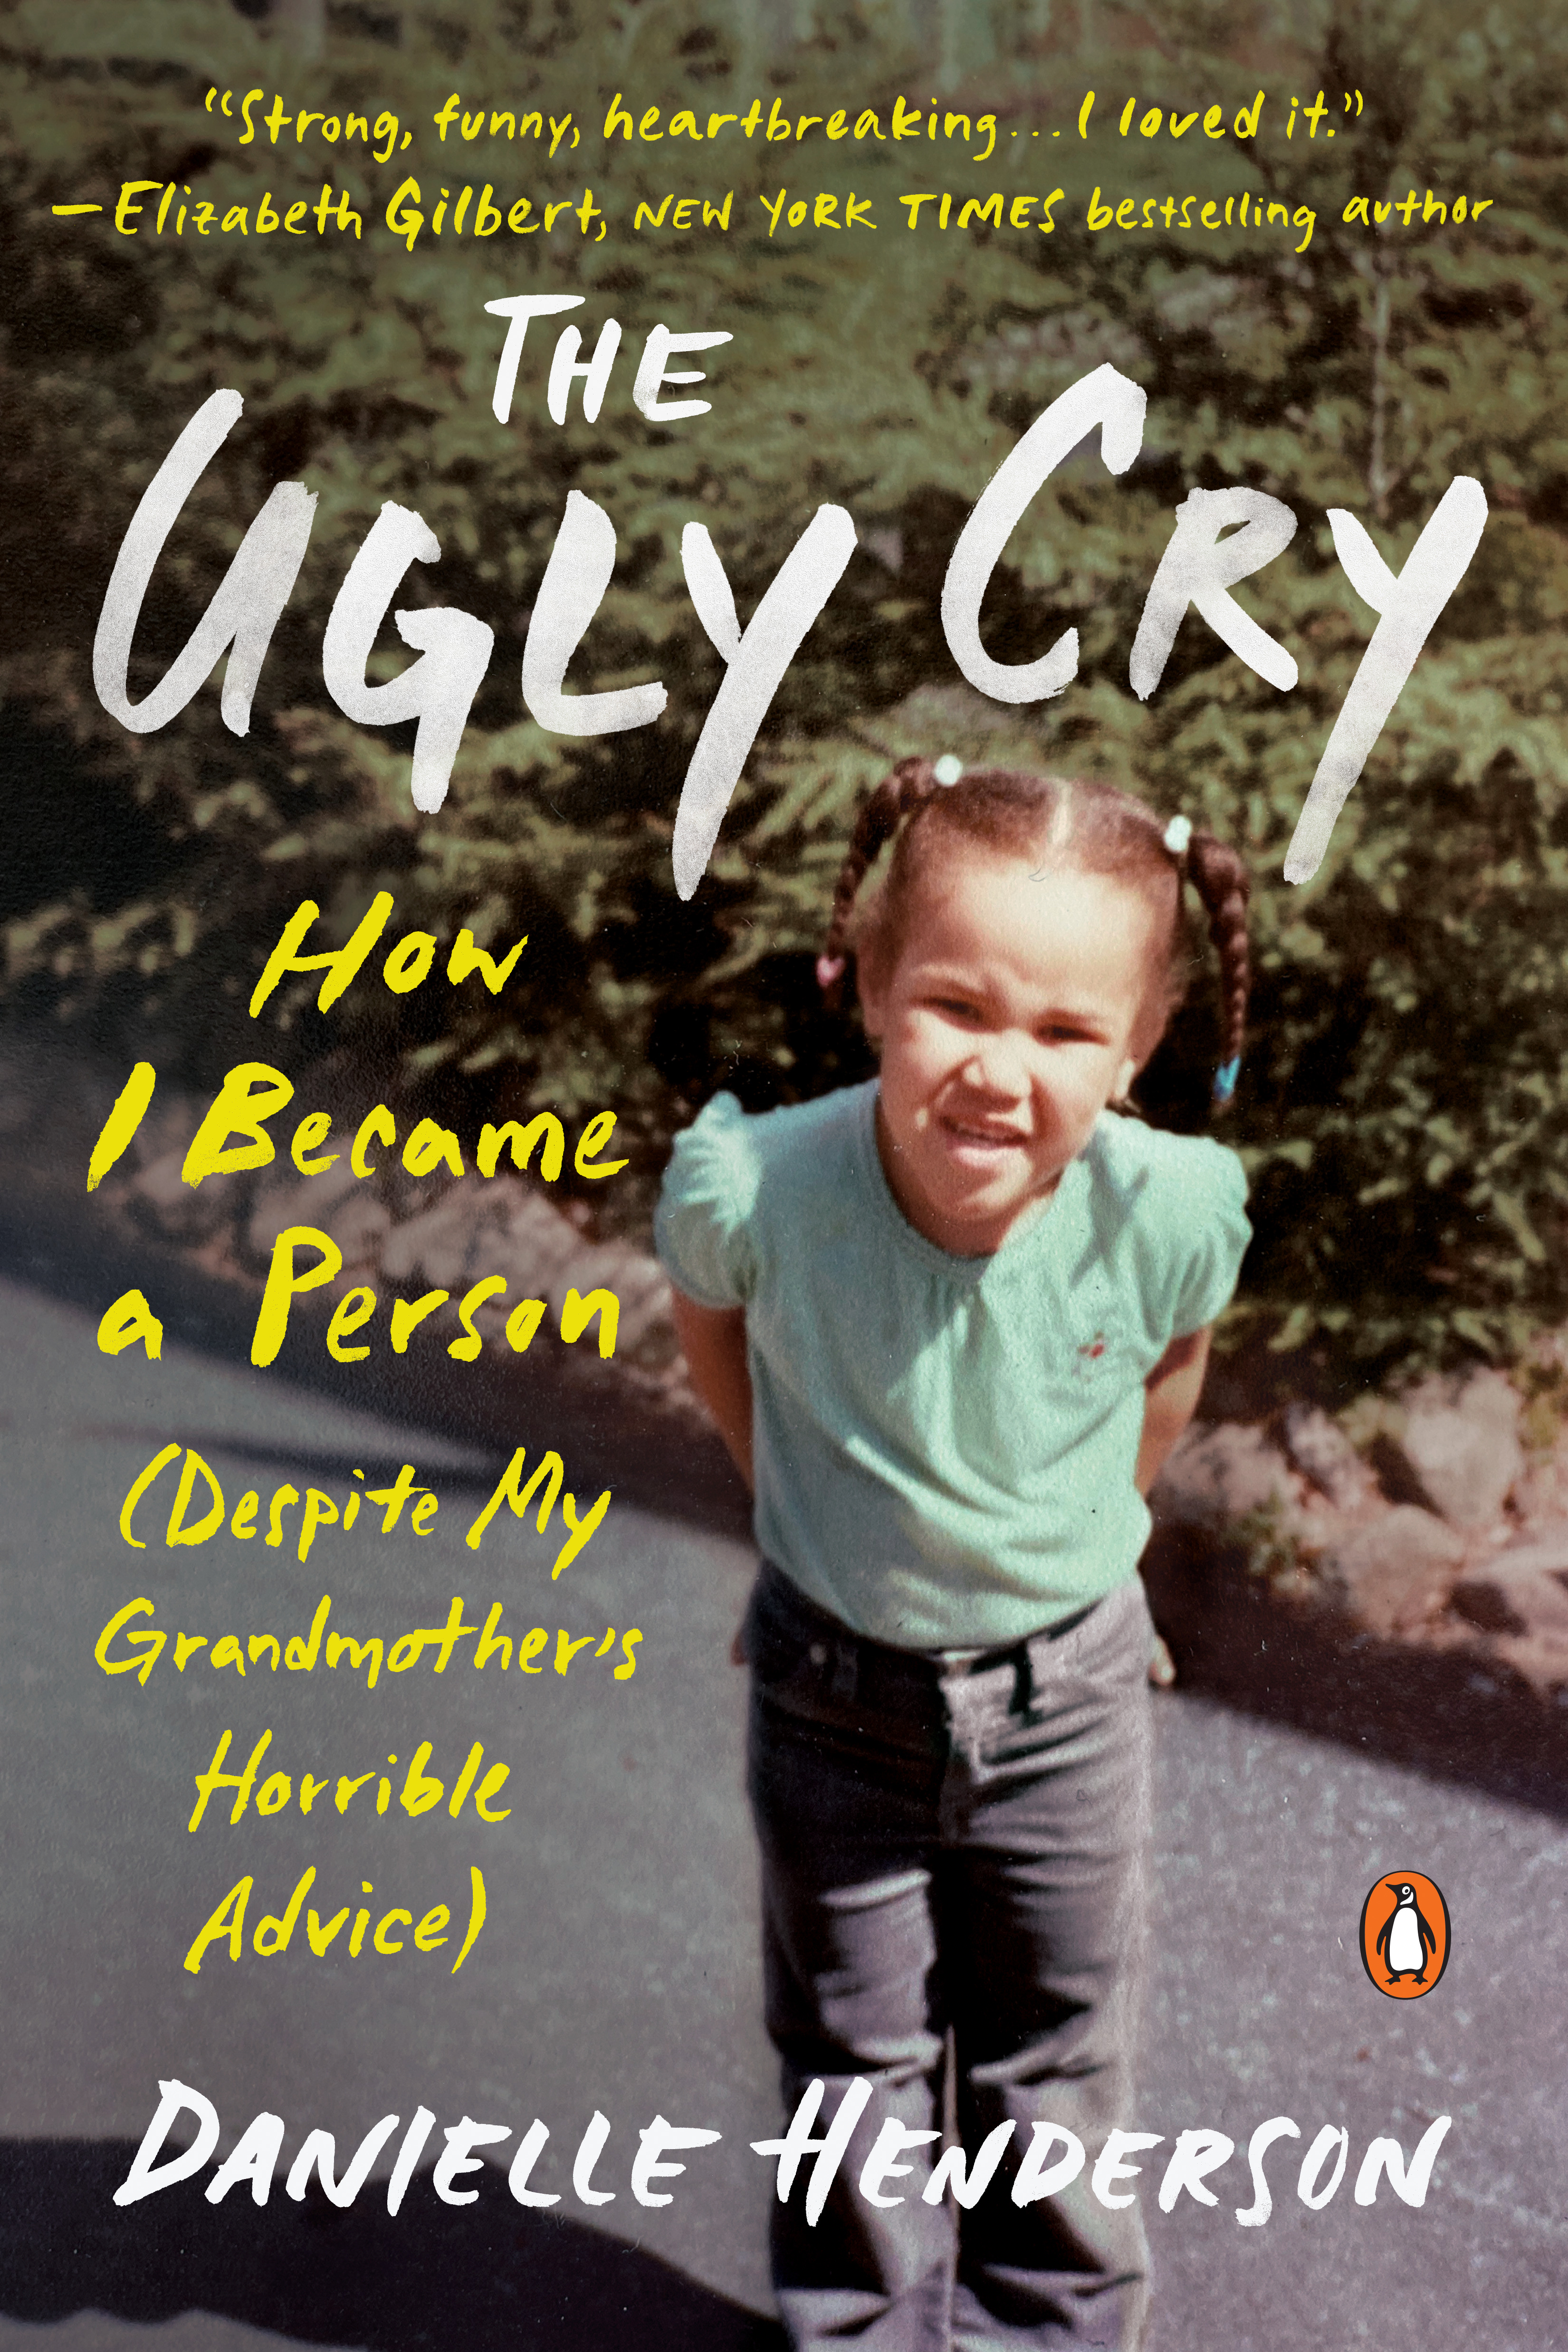 The Ugly Cry : How I Became a Person (Despite My Grandmother's Horrible Advice) | Biography & Memoir